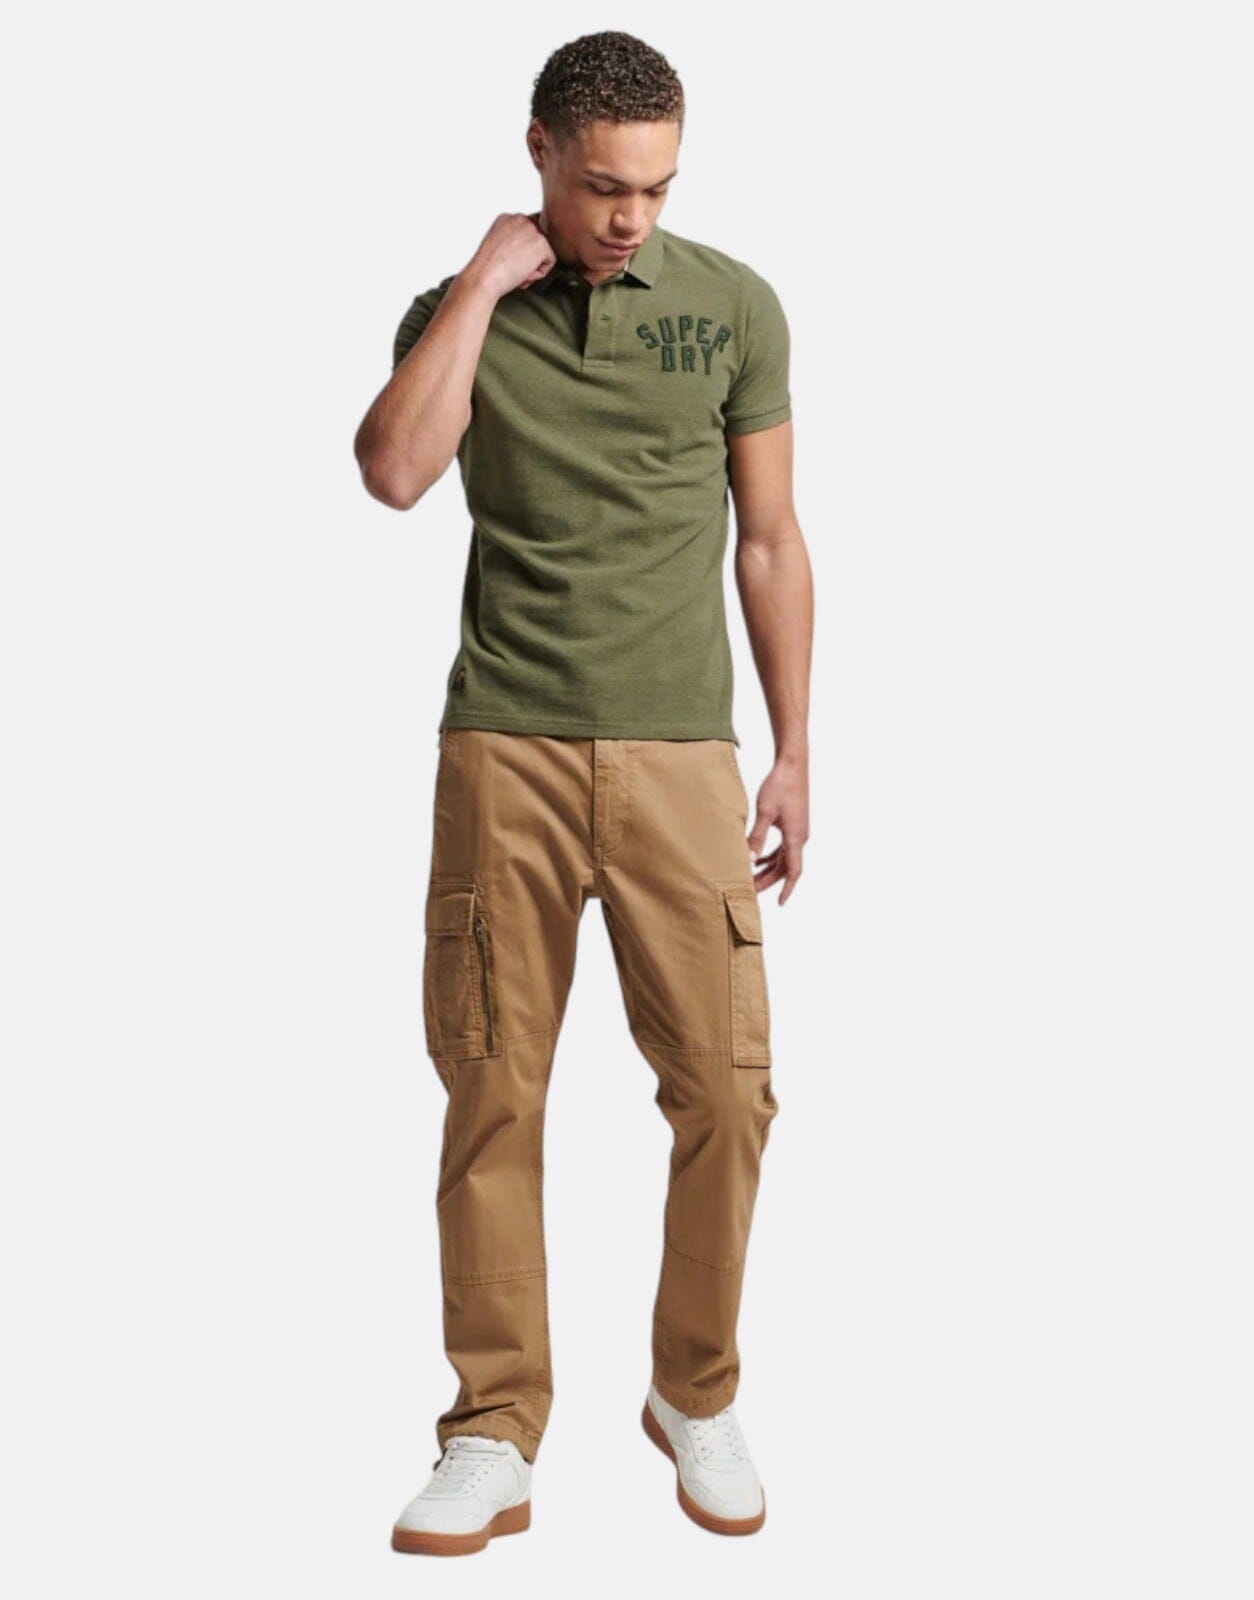 Superdry Superstate Polo Shirt - Subwear